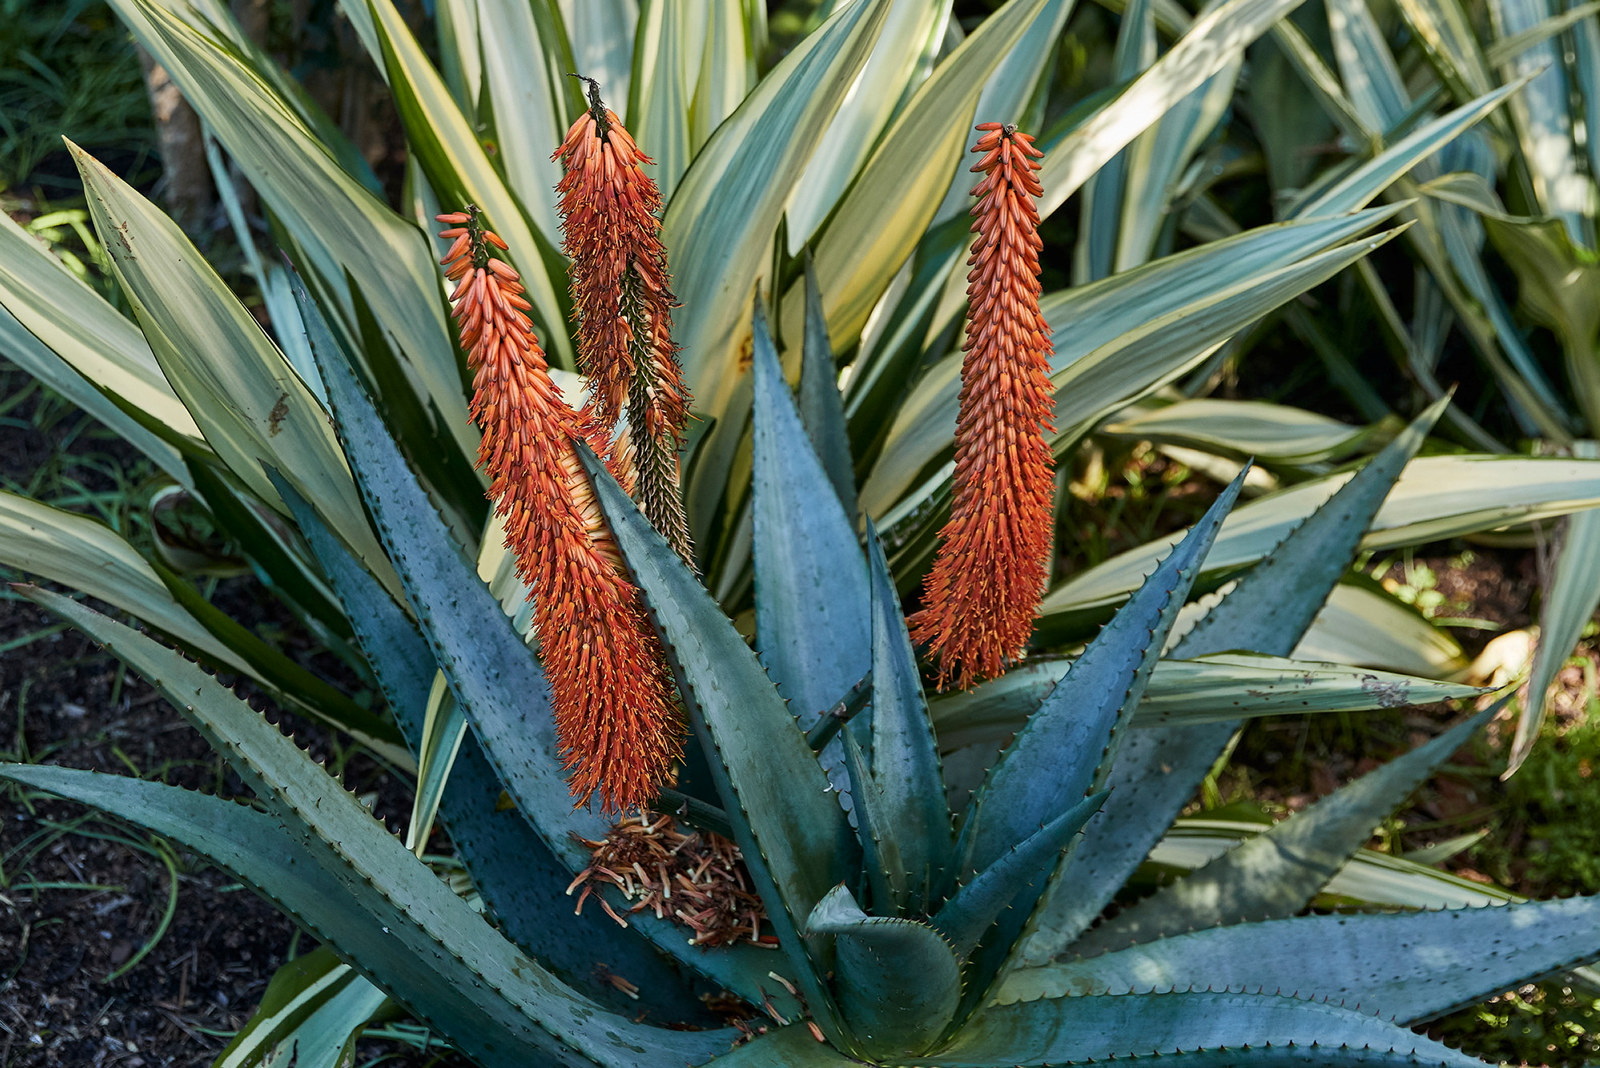 Serrated edged spiked leaves with orange flower spikes.